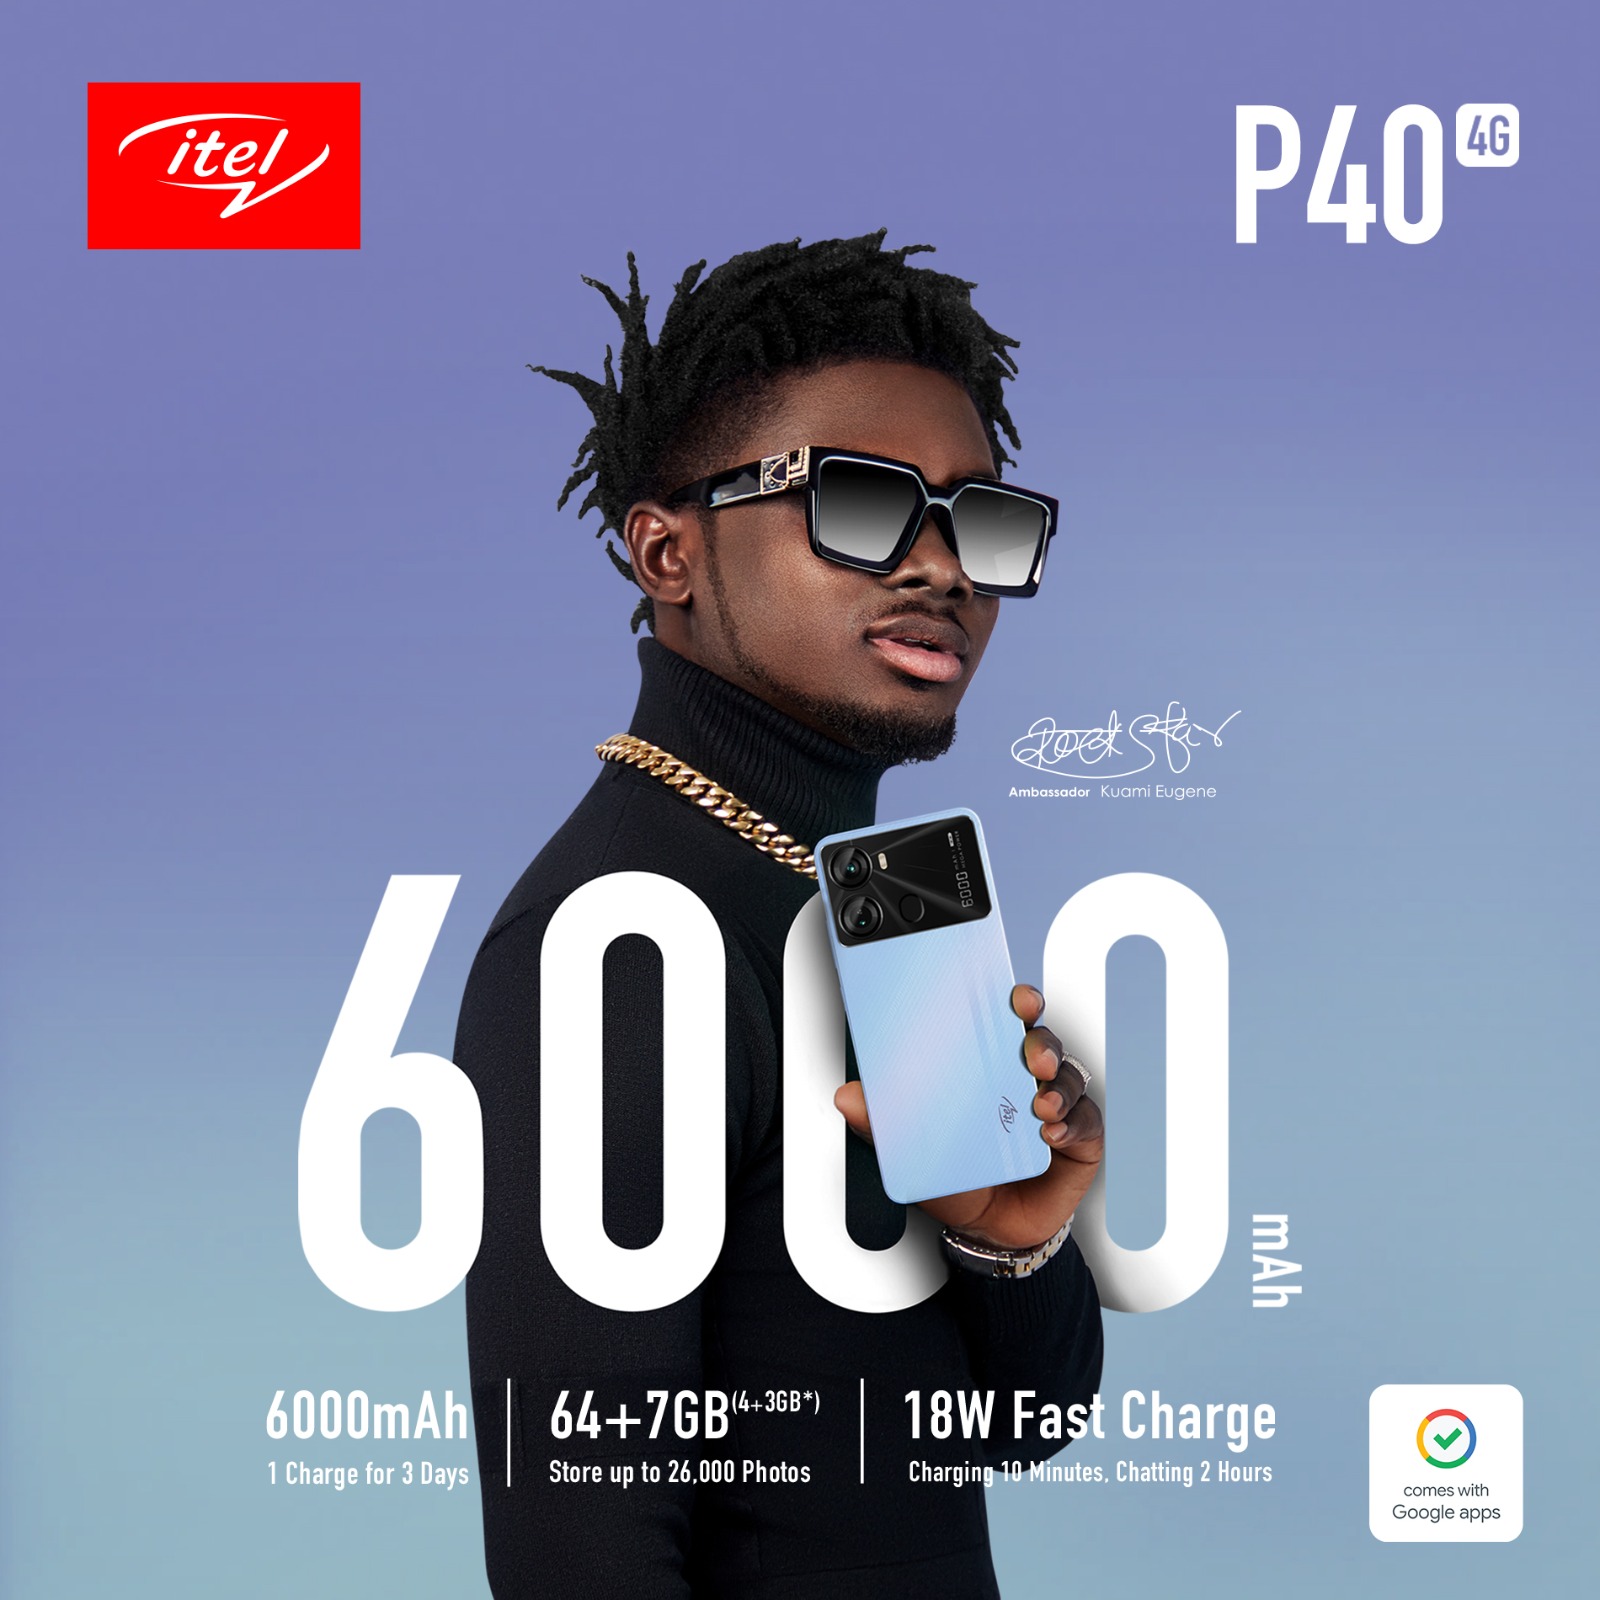 itel Launches the P40 Smartphone in Ghana, Partners with Vodafone to Offer Free 12GB Data Bundle